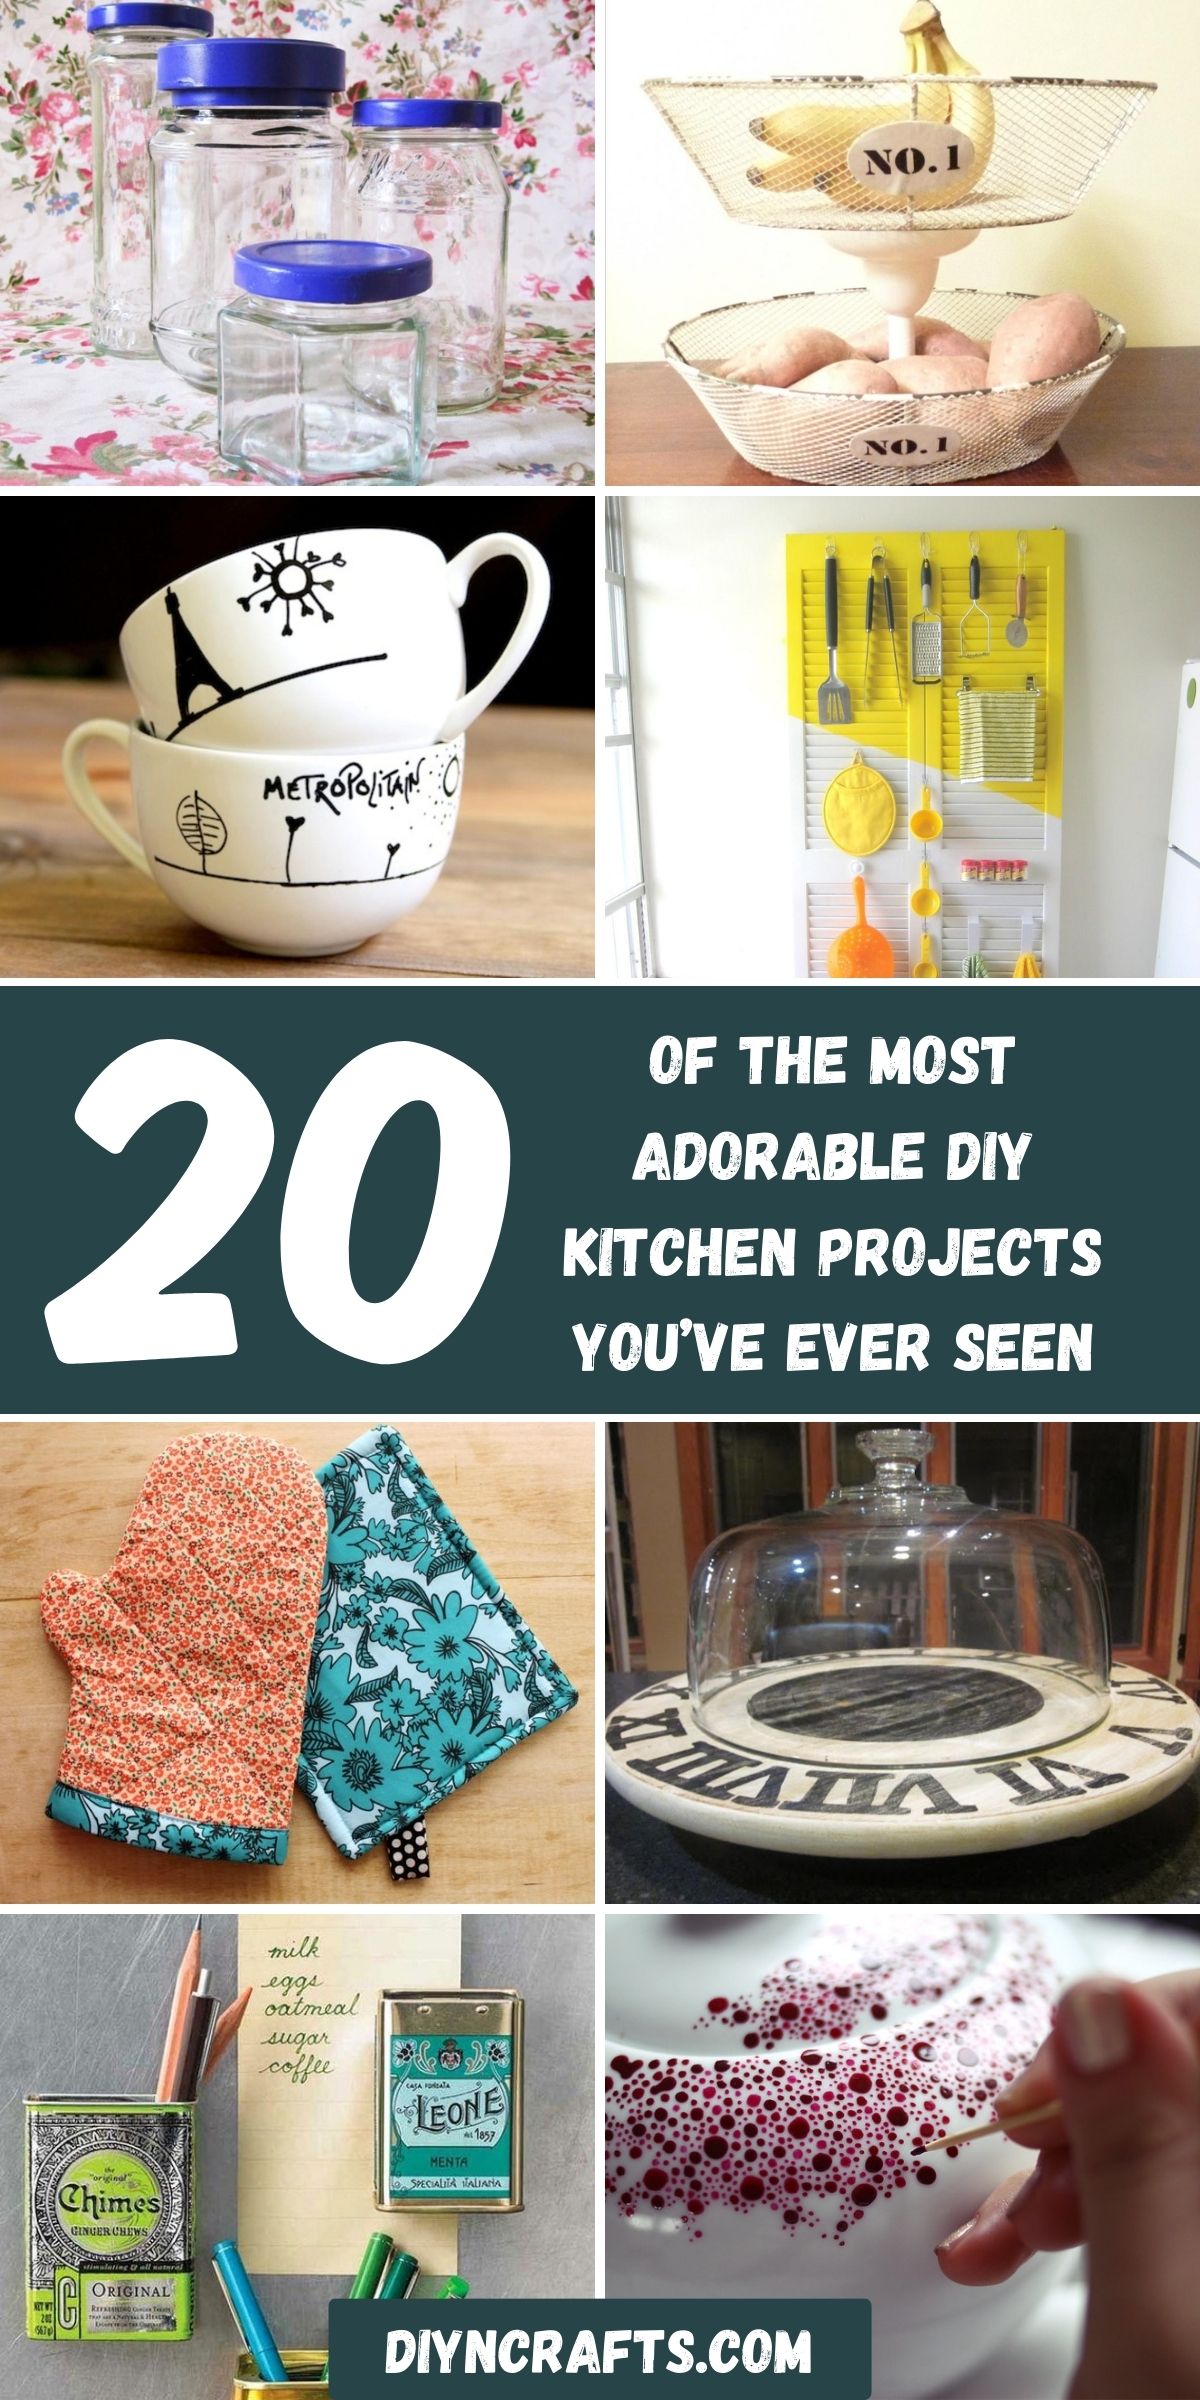 20 of the Most Adorable DIY Kitchen Projects You’ve Ever Seen collage.